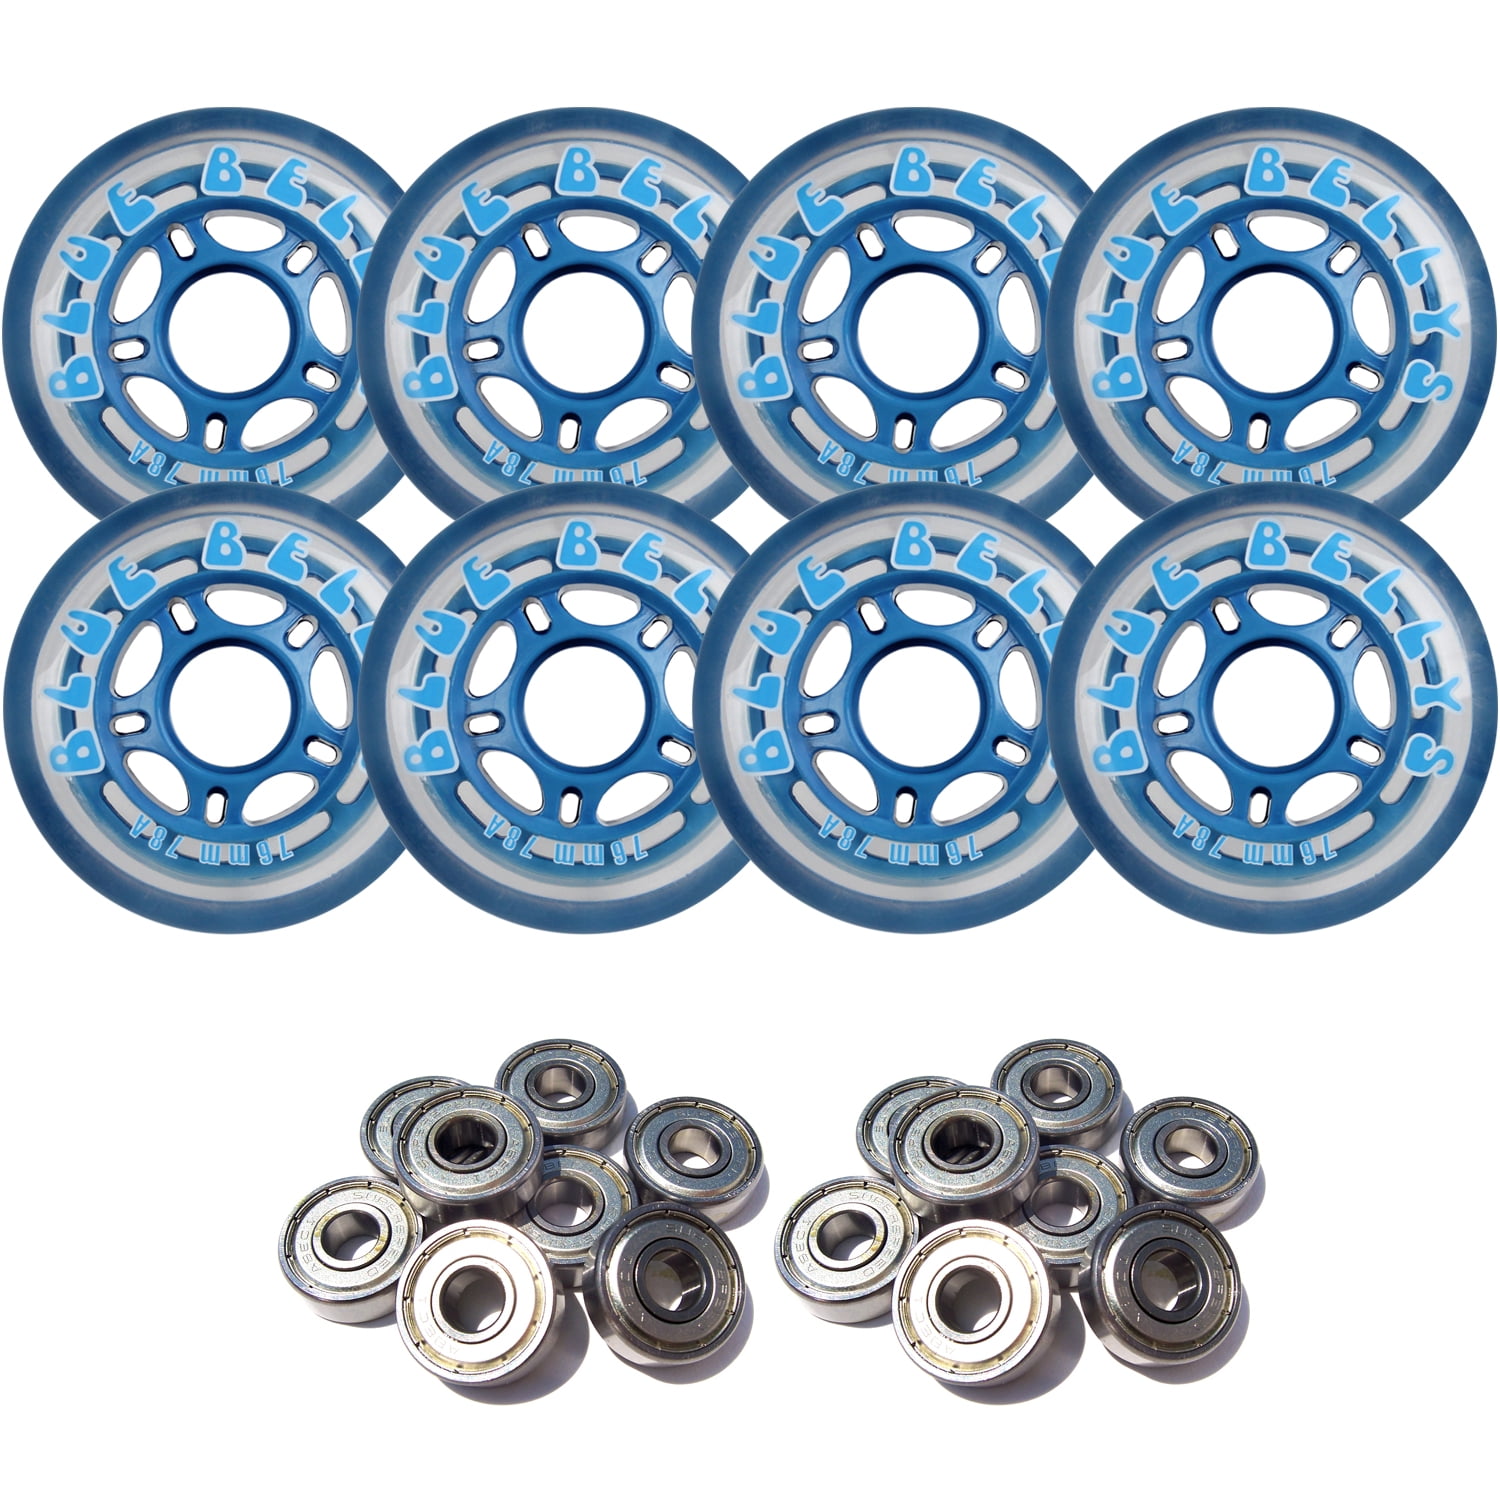 Lot of 24 Rollerblade Inline Fitness Hockey Skate Wheels 70mm 78A Clear 